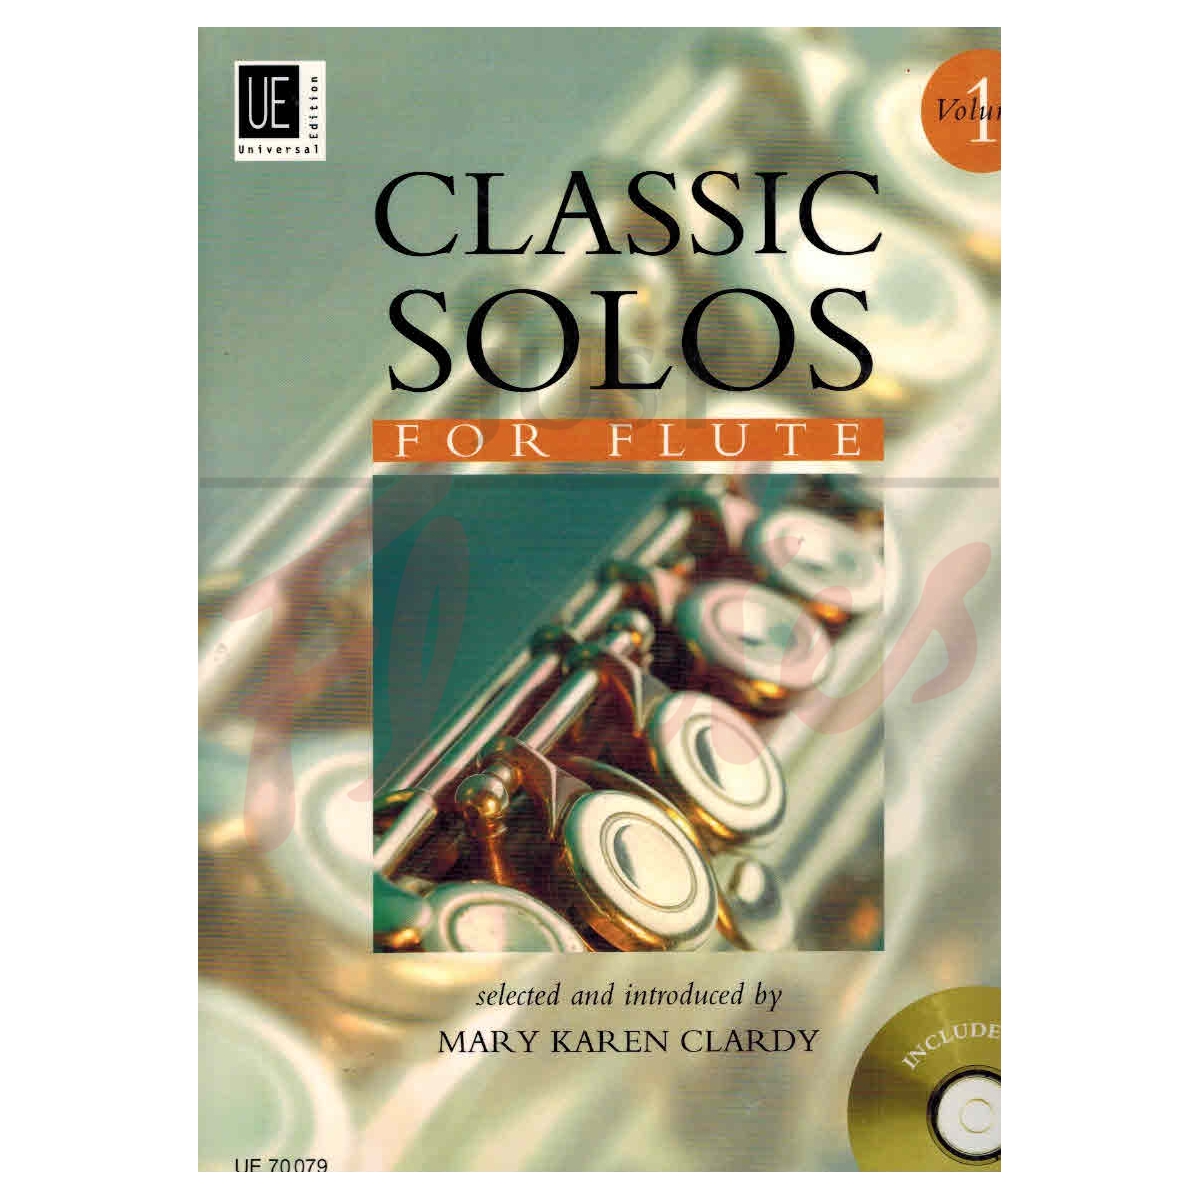 Classic Solos for Flute